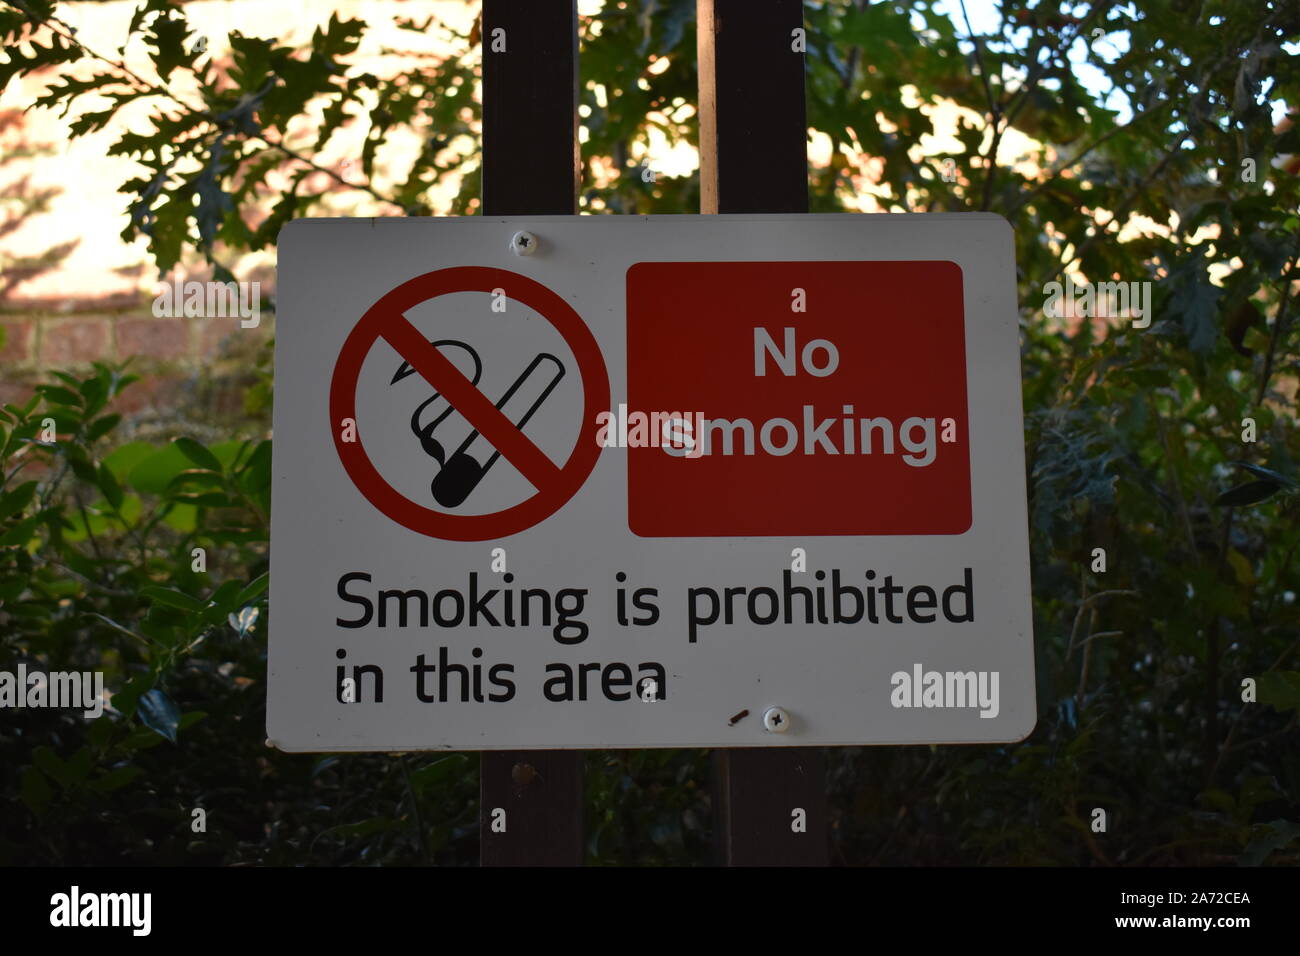 No smoking sign - smoking is prohibited in this area. Stock Photo